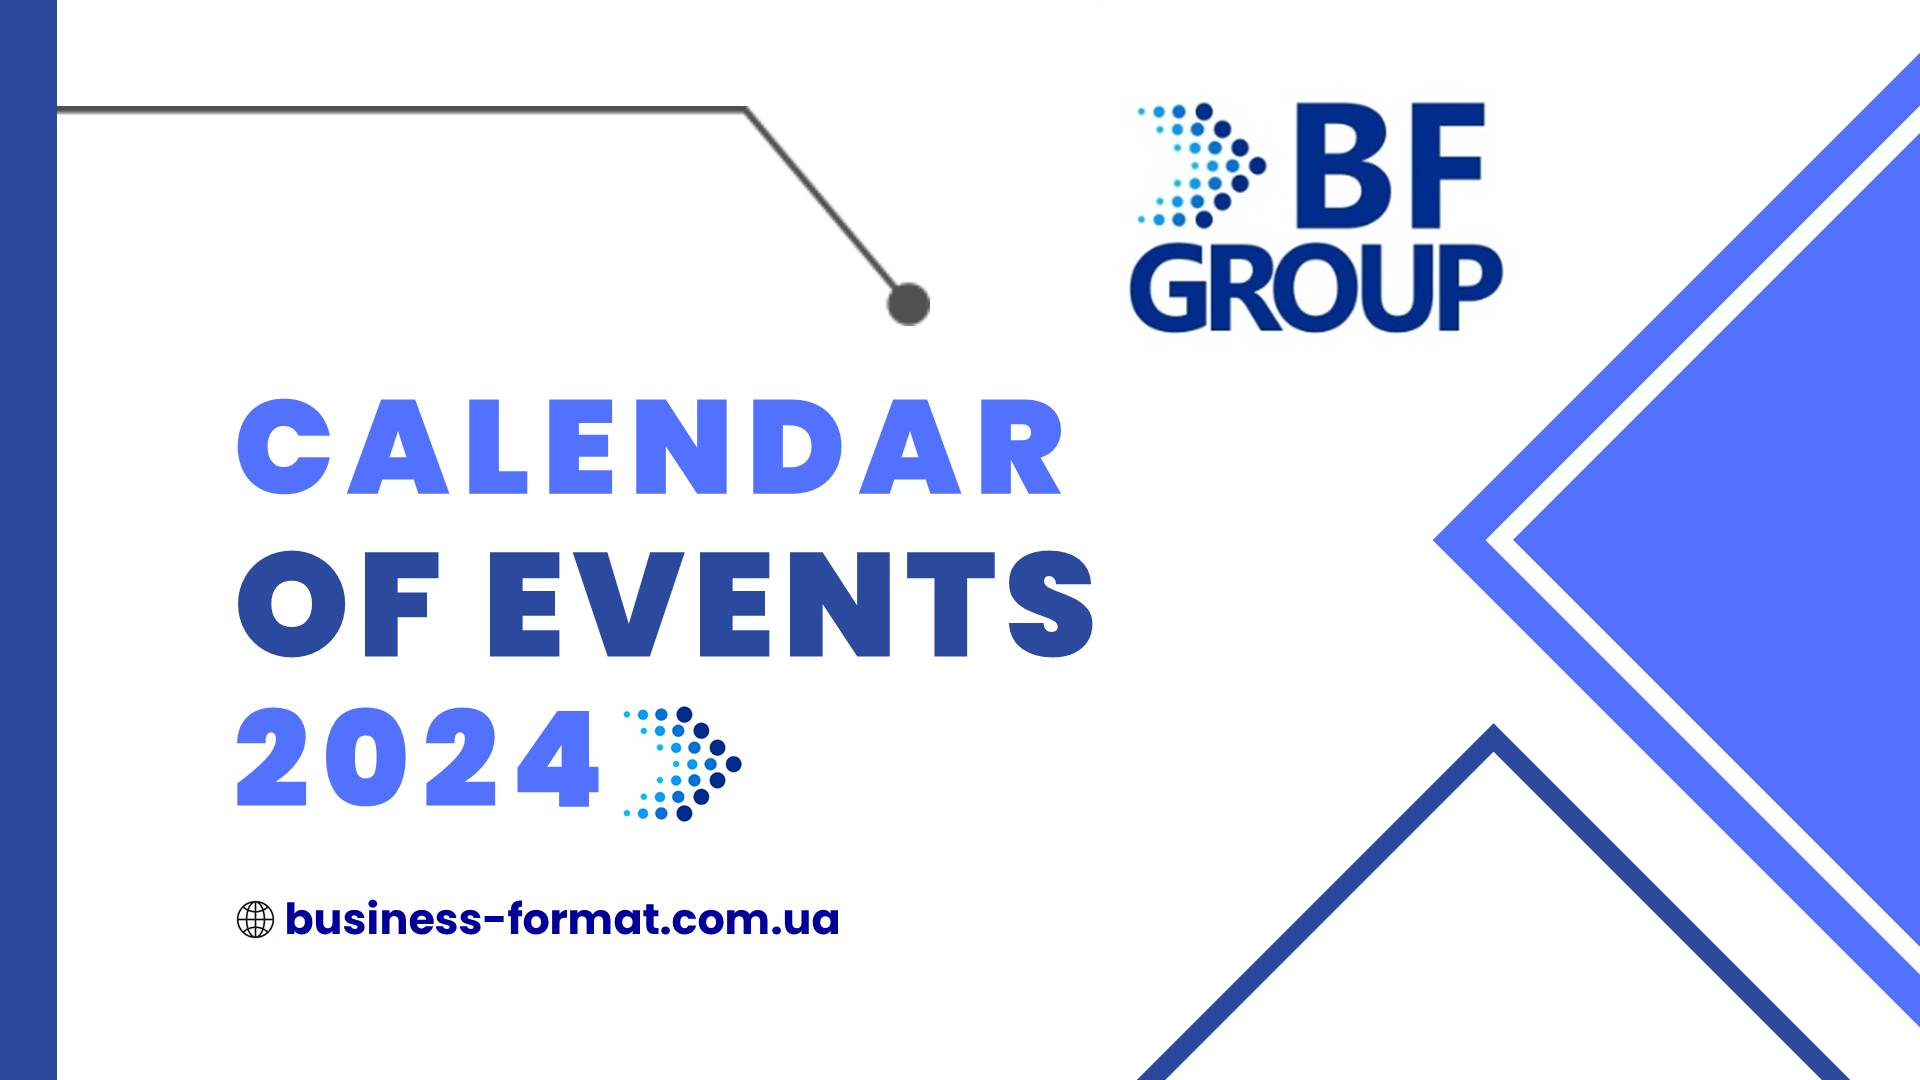 CONFERENCE CALENDAR “Business-Format Group” for 2024